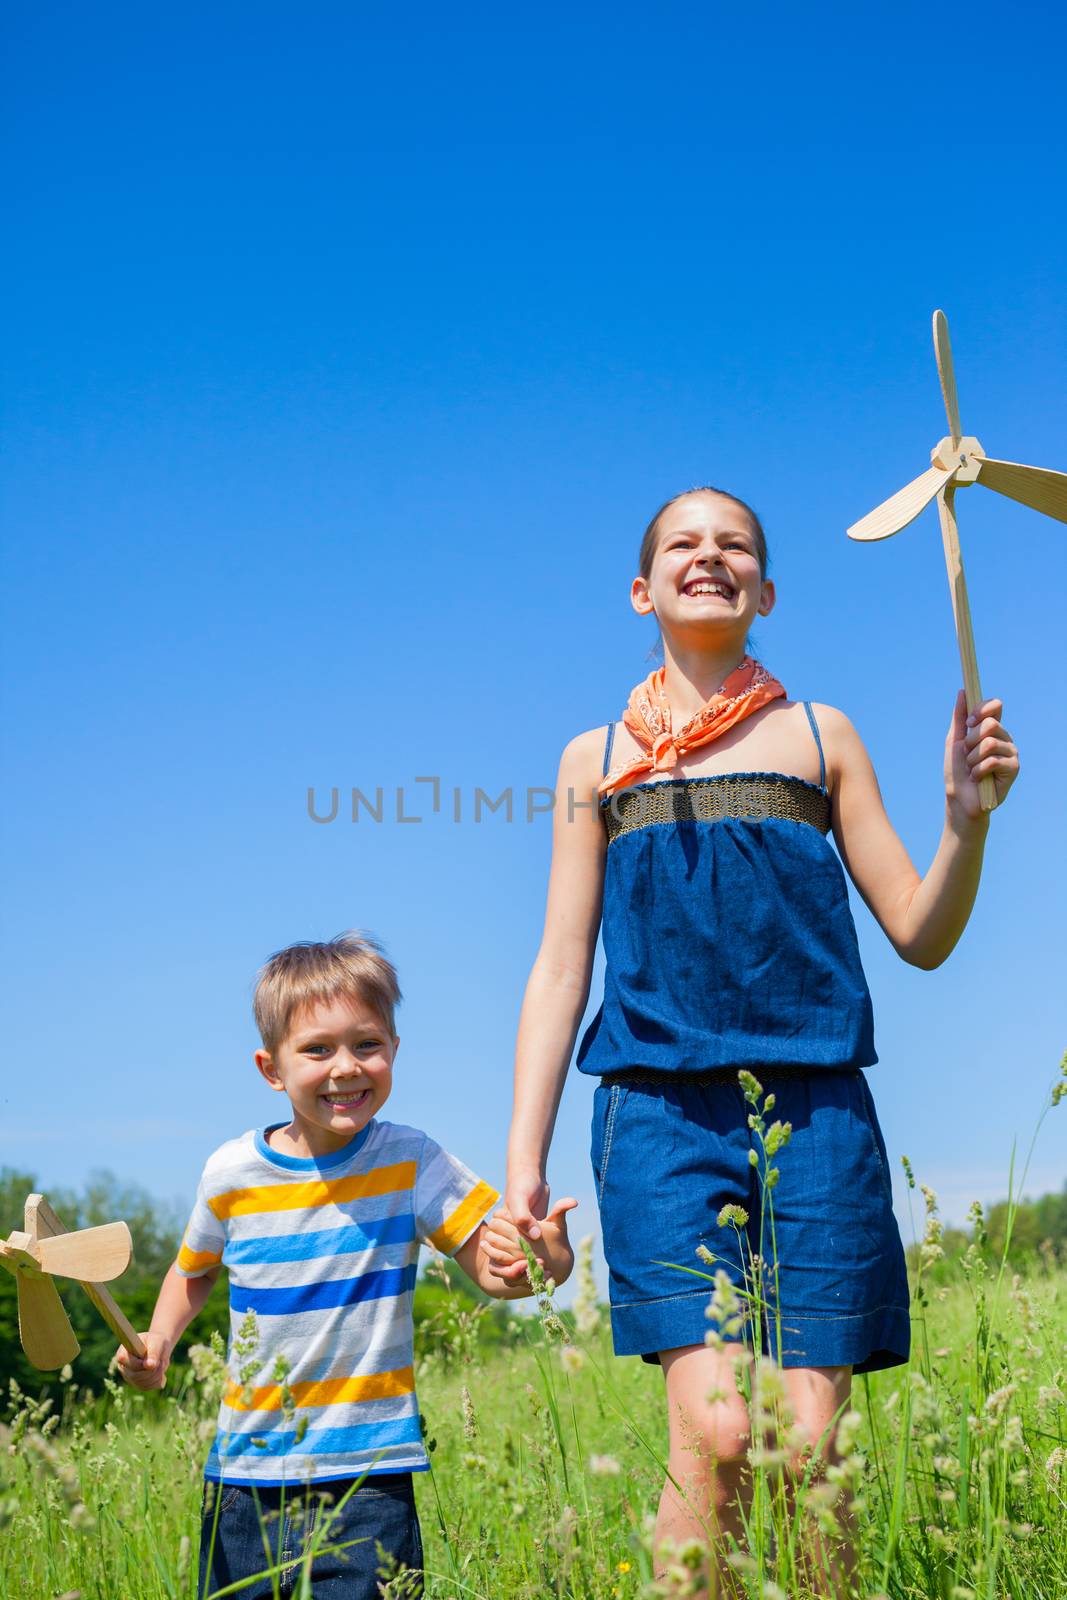 Kids in summer day holds windmill by maxoliki